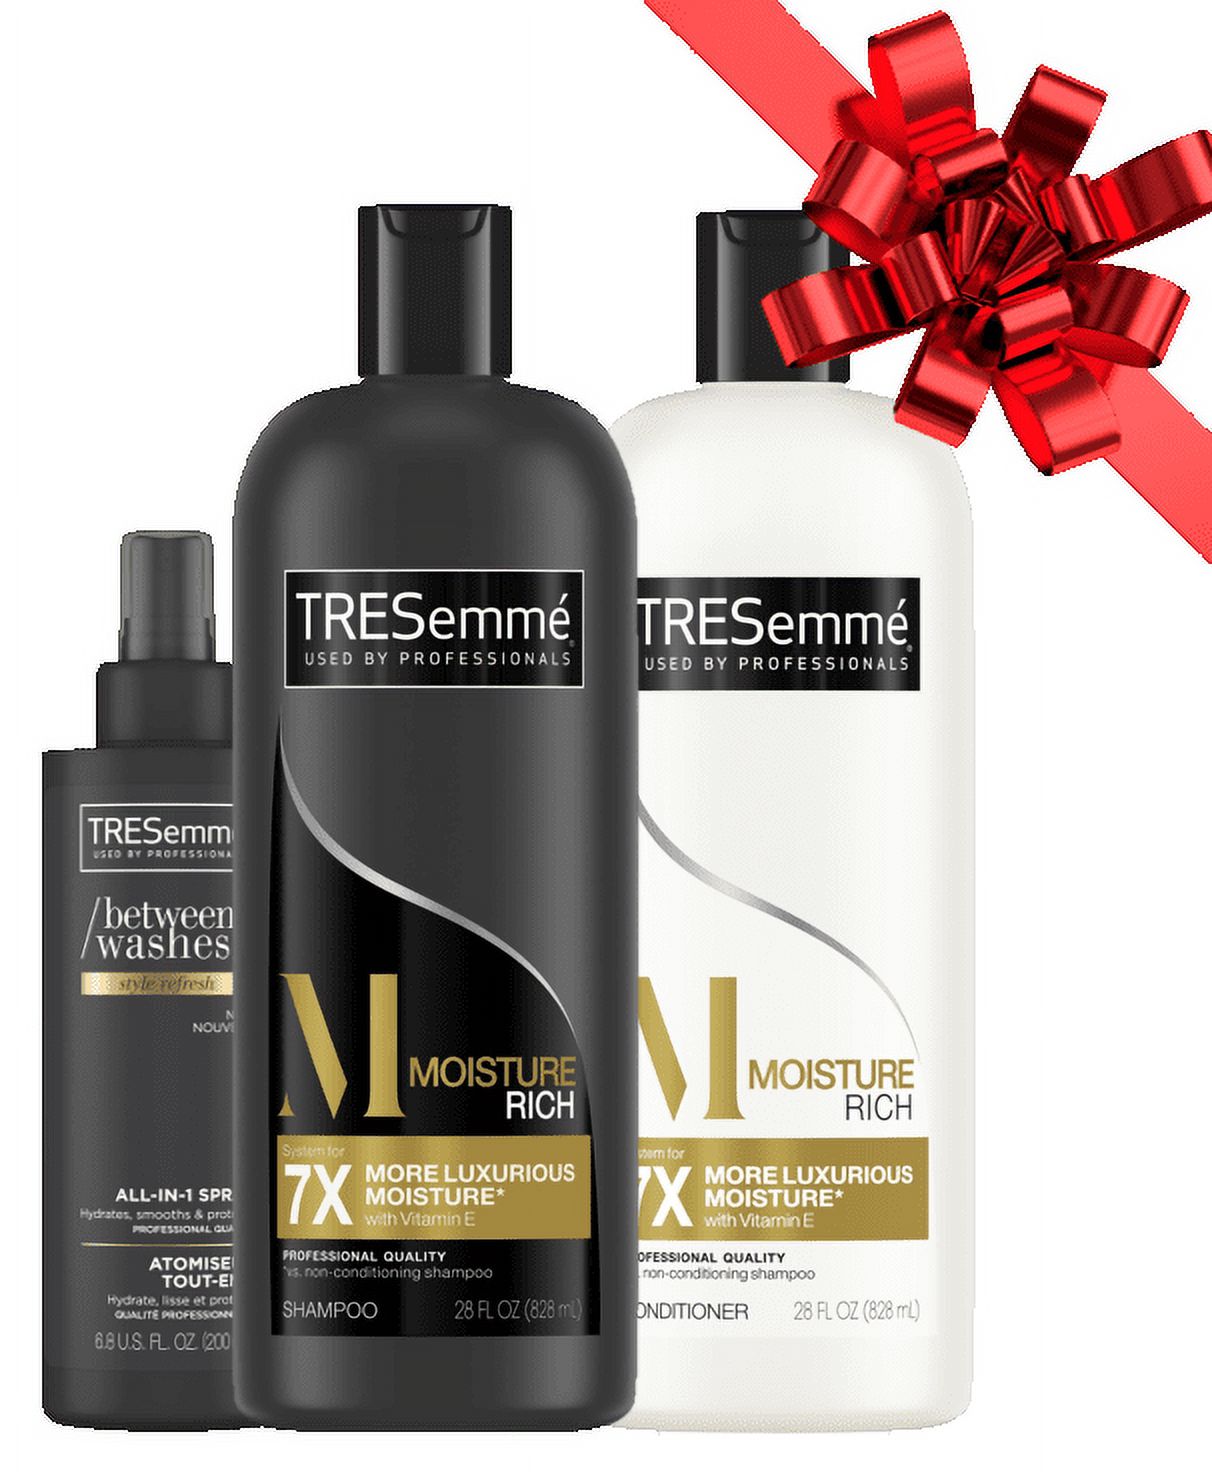 ($13 Value) TRESemme 3-Piece Moisture Rich Gift Set with Shampoo, Conditioner, and All-In-One Styling Spray - image 1 of 10